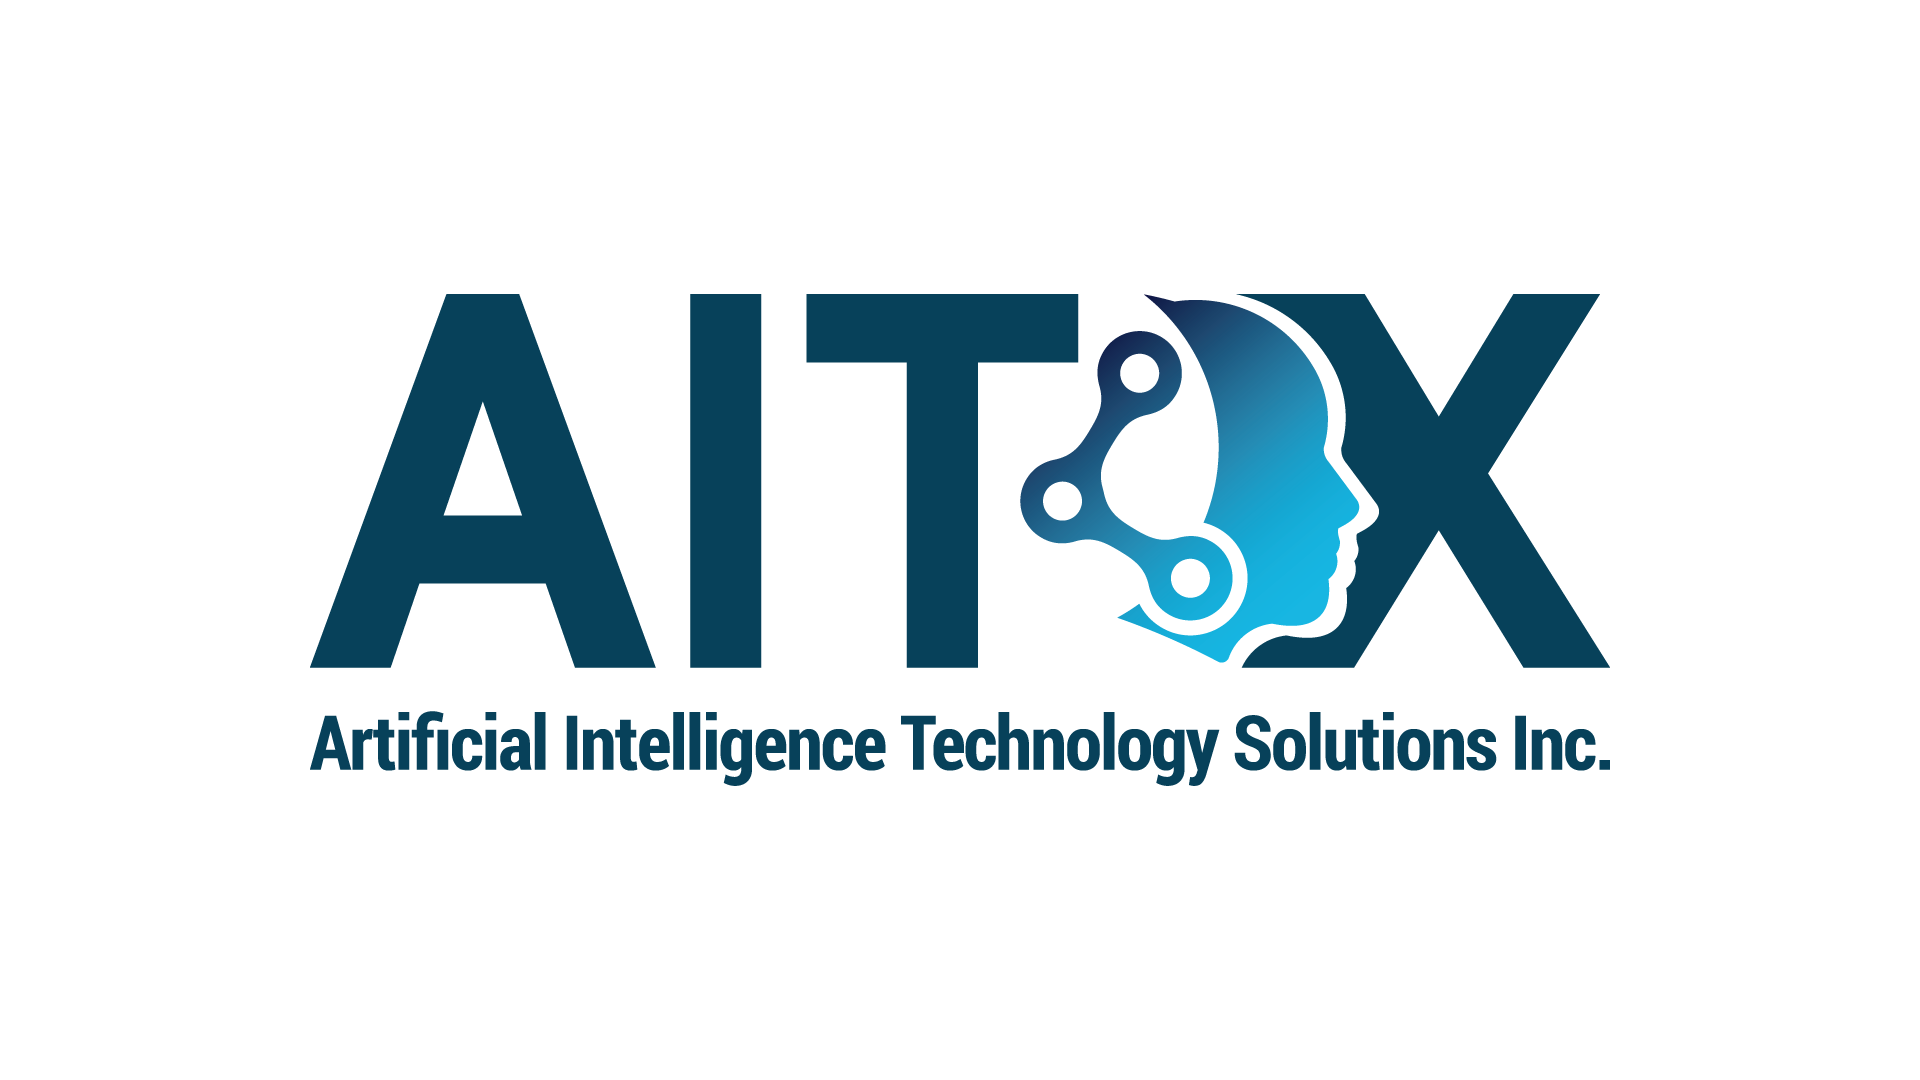 AITX's RAD-G Announces the Development of its First Generation Compute ...